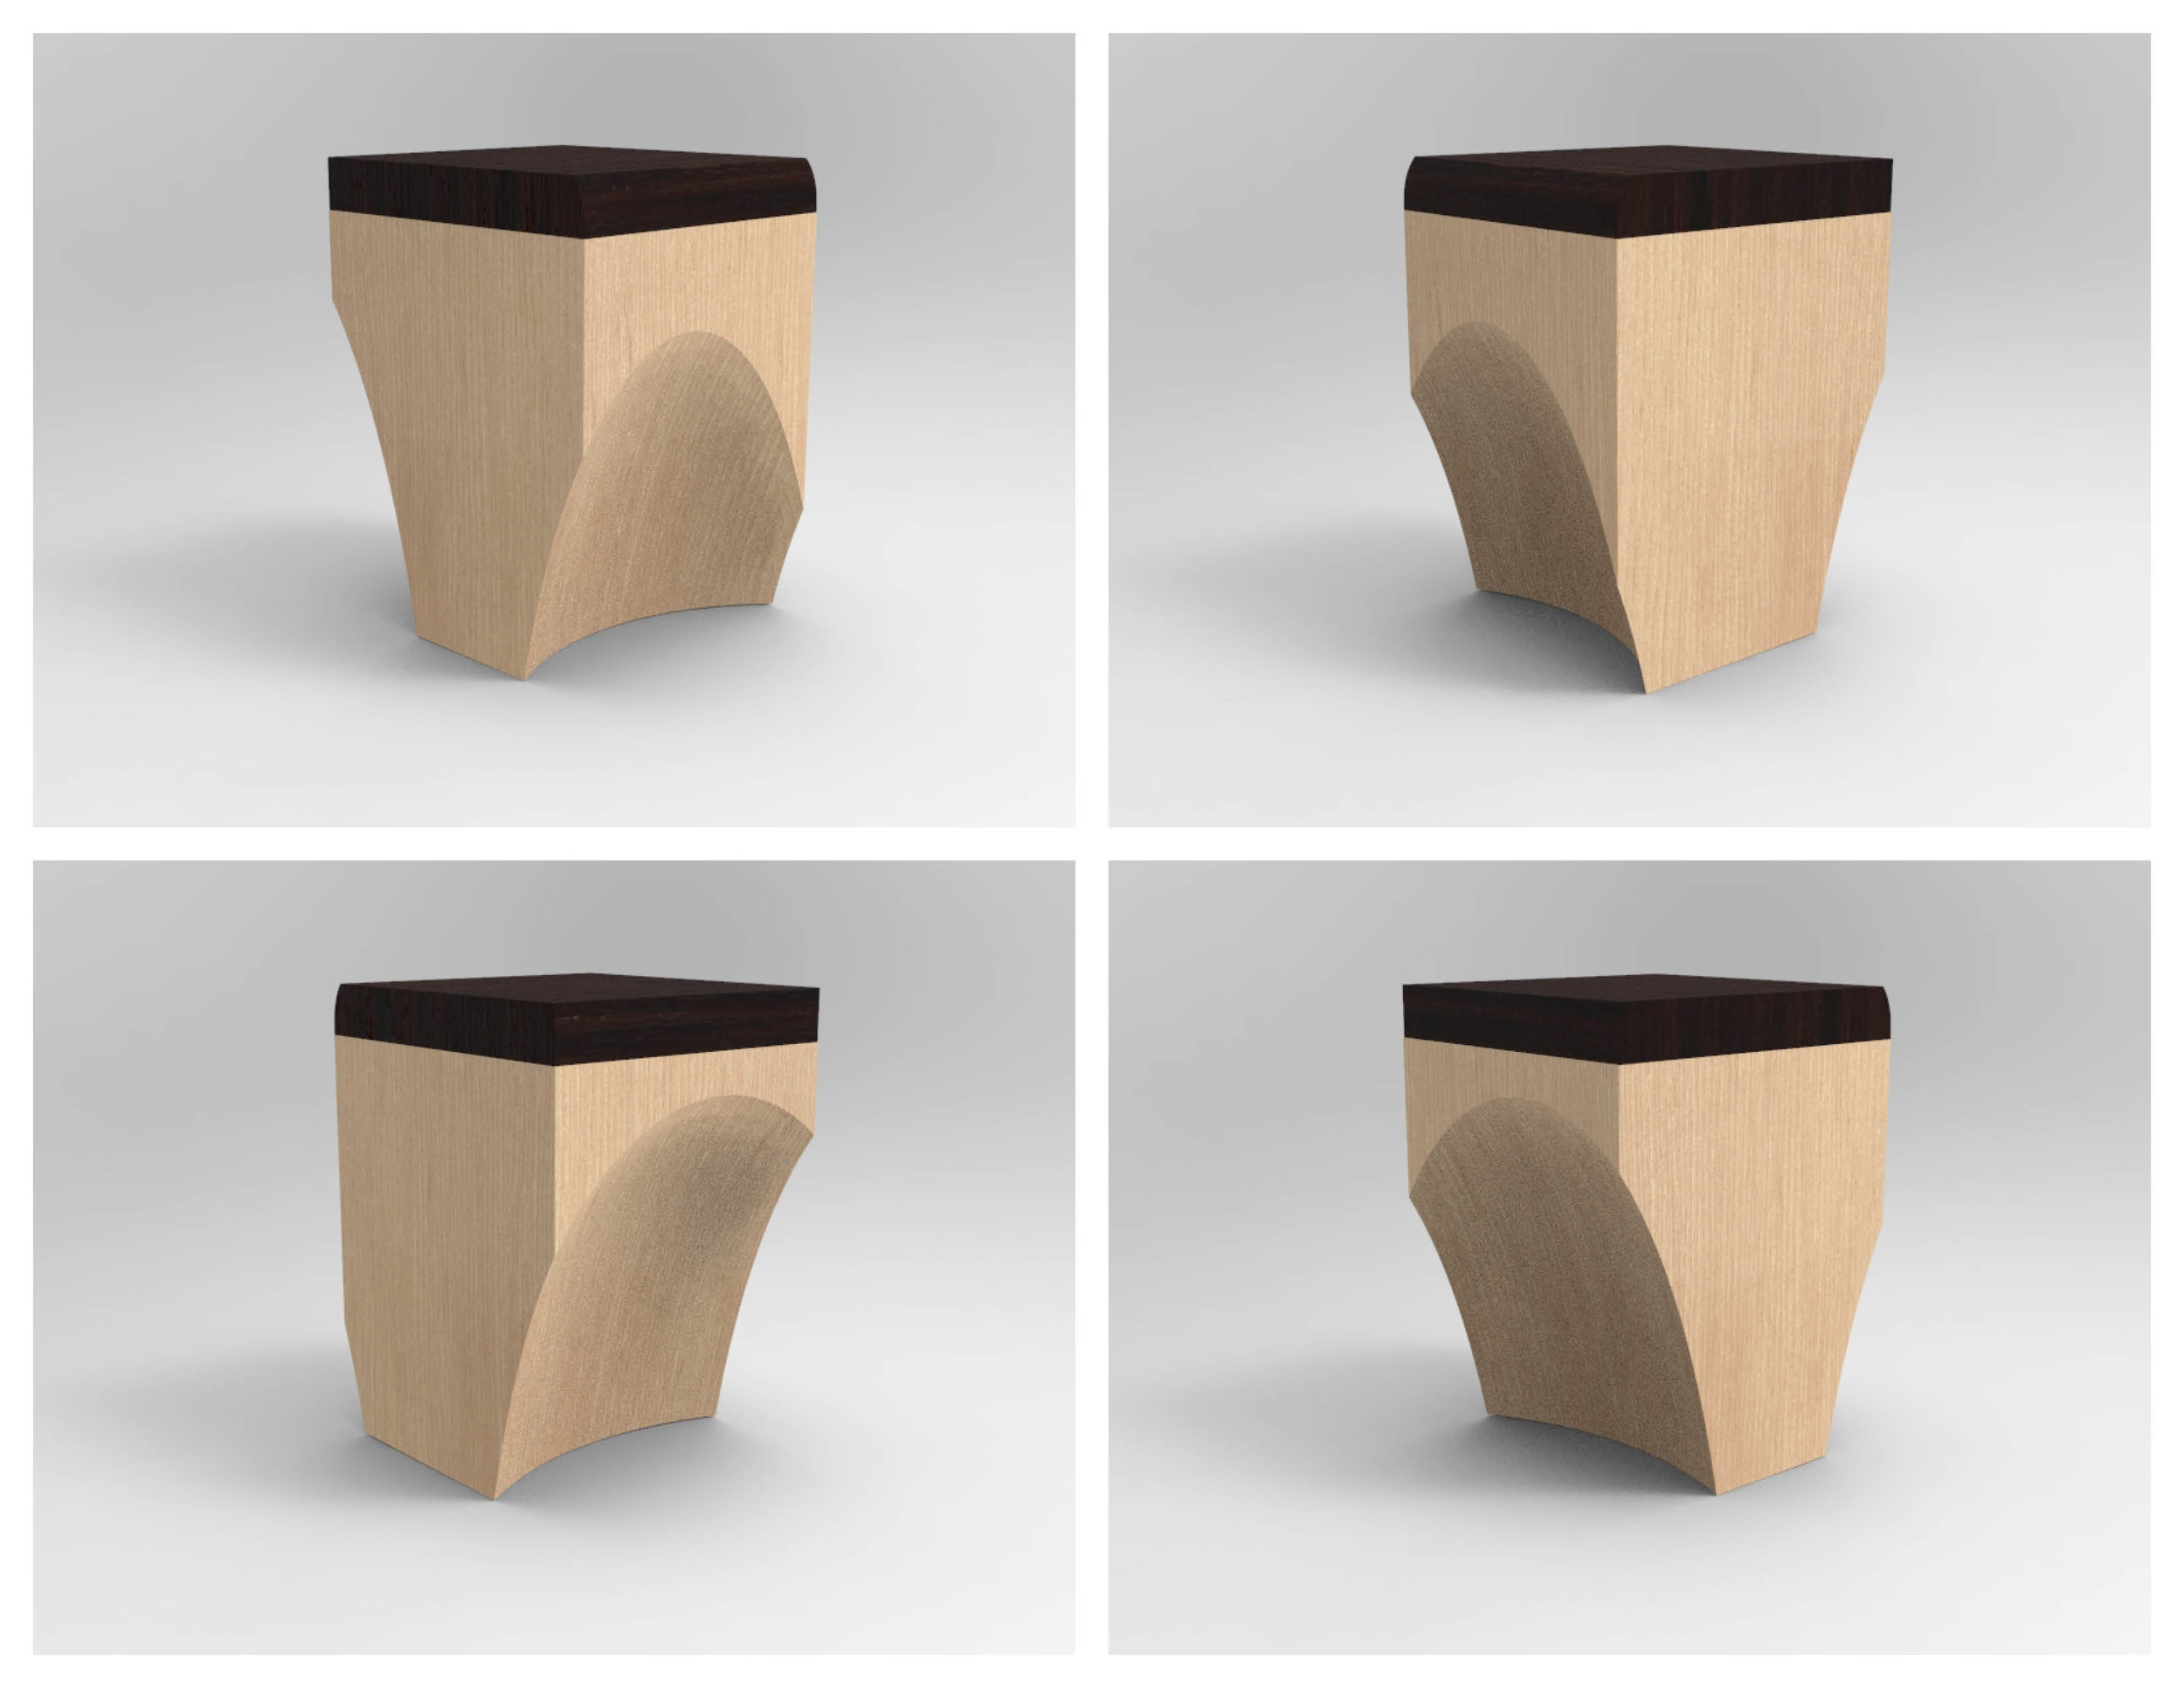 Stool Concept 1: Additional Perspective Views